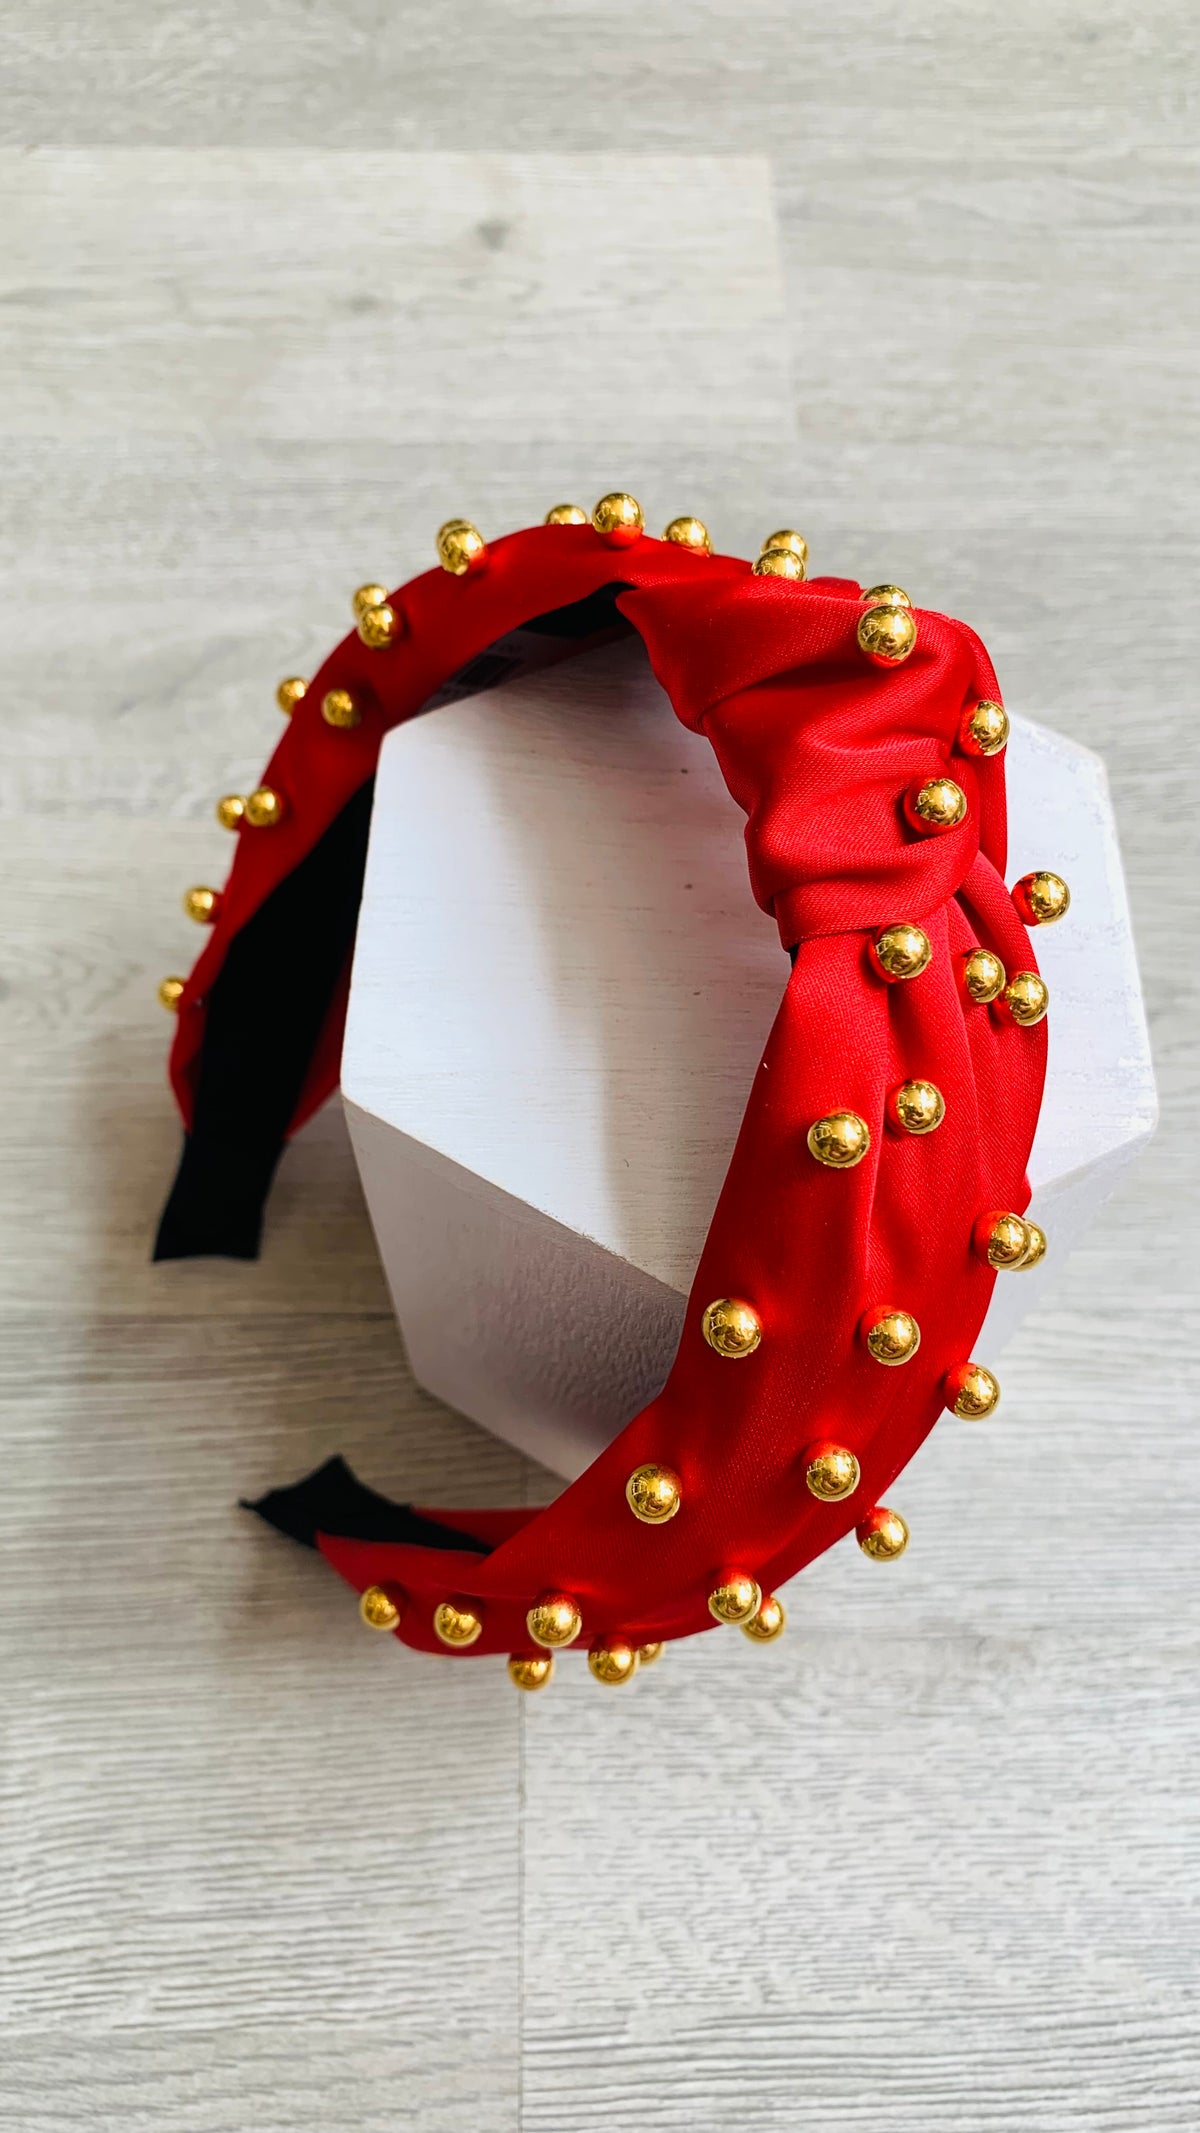 Ruby Jewel Red Gold Bead Headband-260 Hair Accessories-Kenze Panne-Peachy Keen Boutique, Women's Fashion Boutique, Located in Cape Girardeau and Dexter, MO